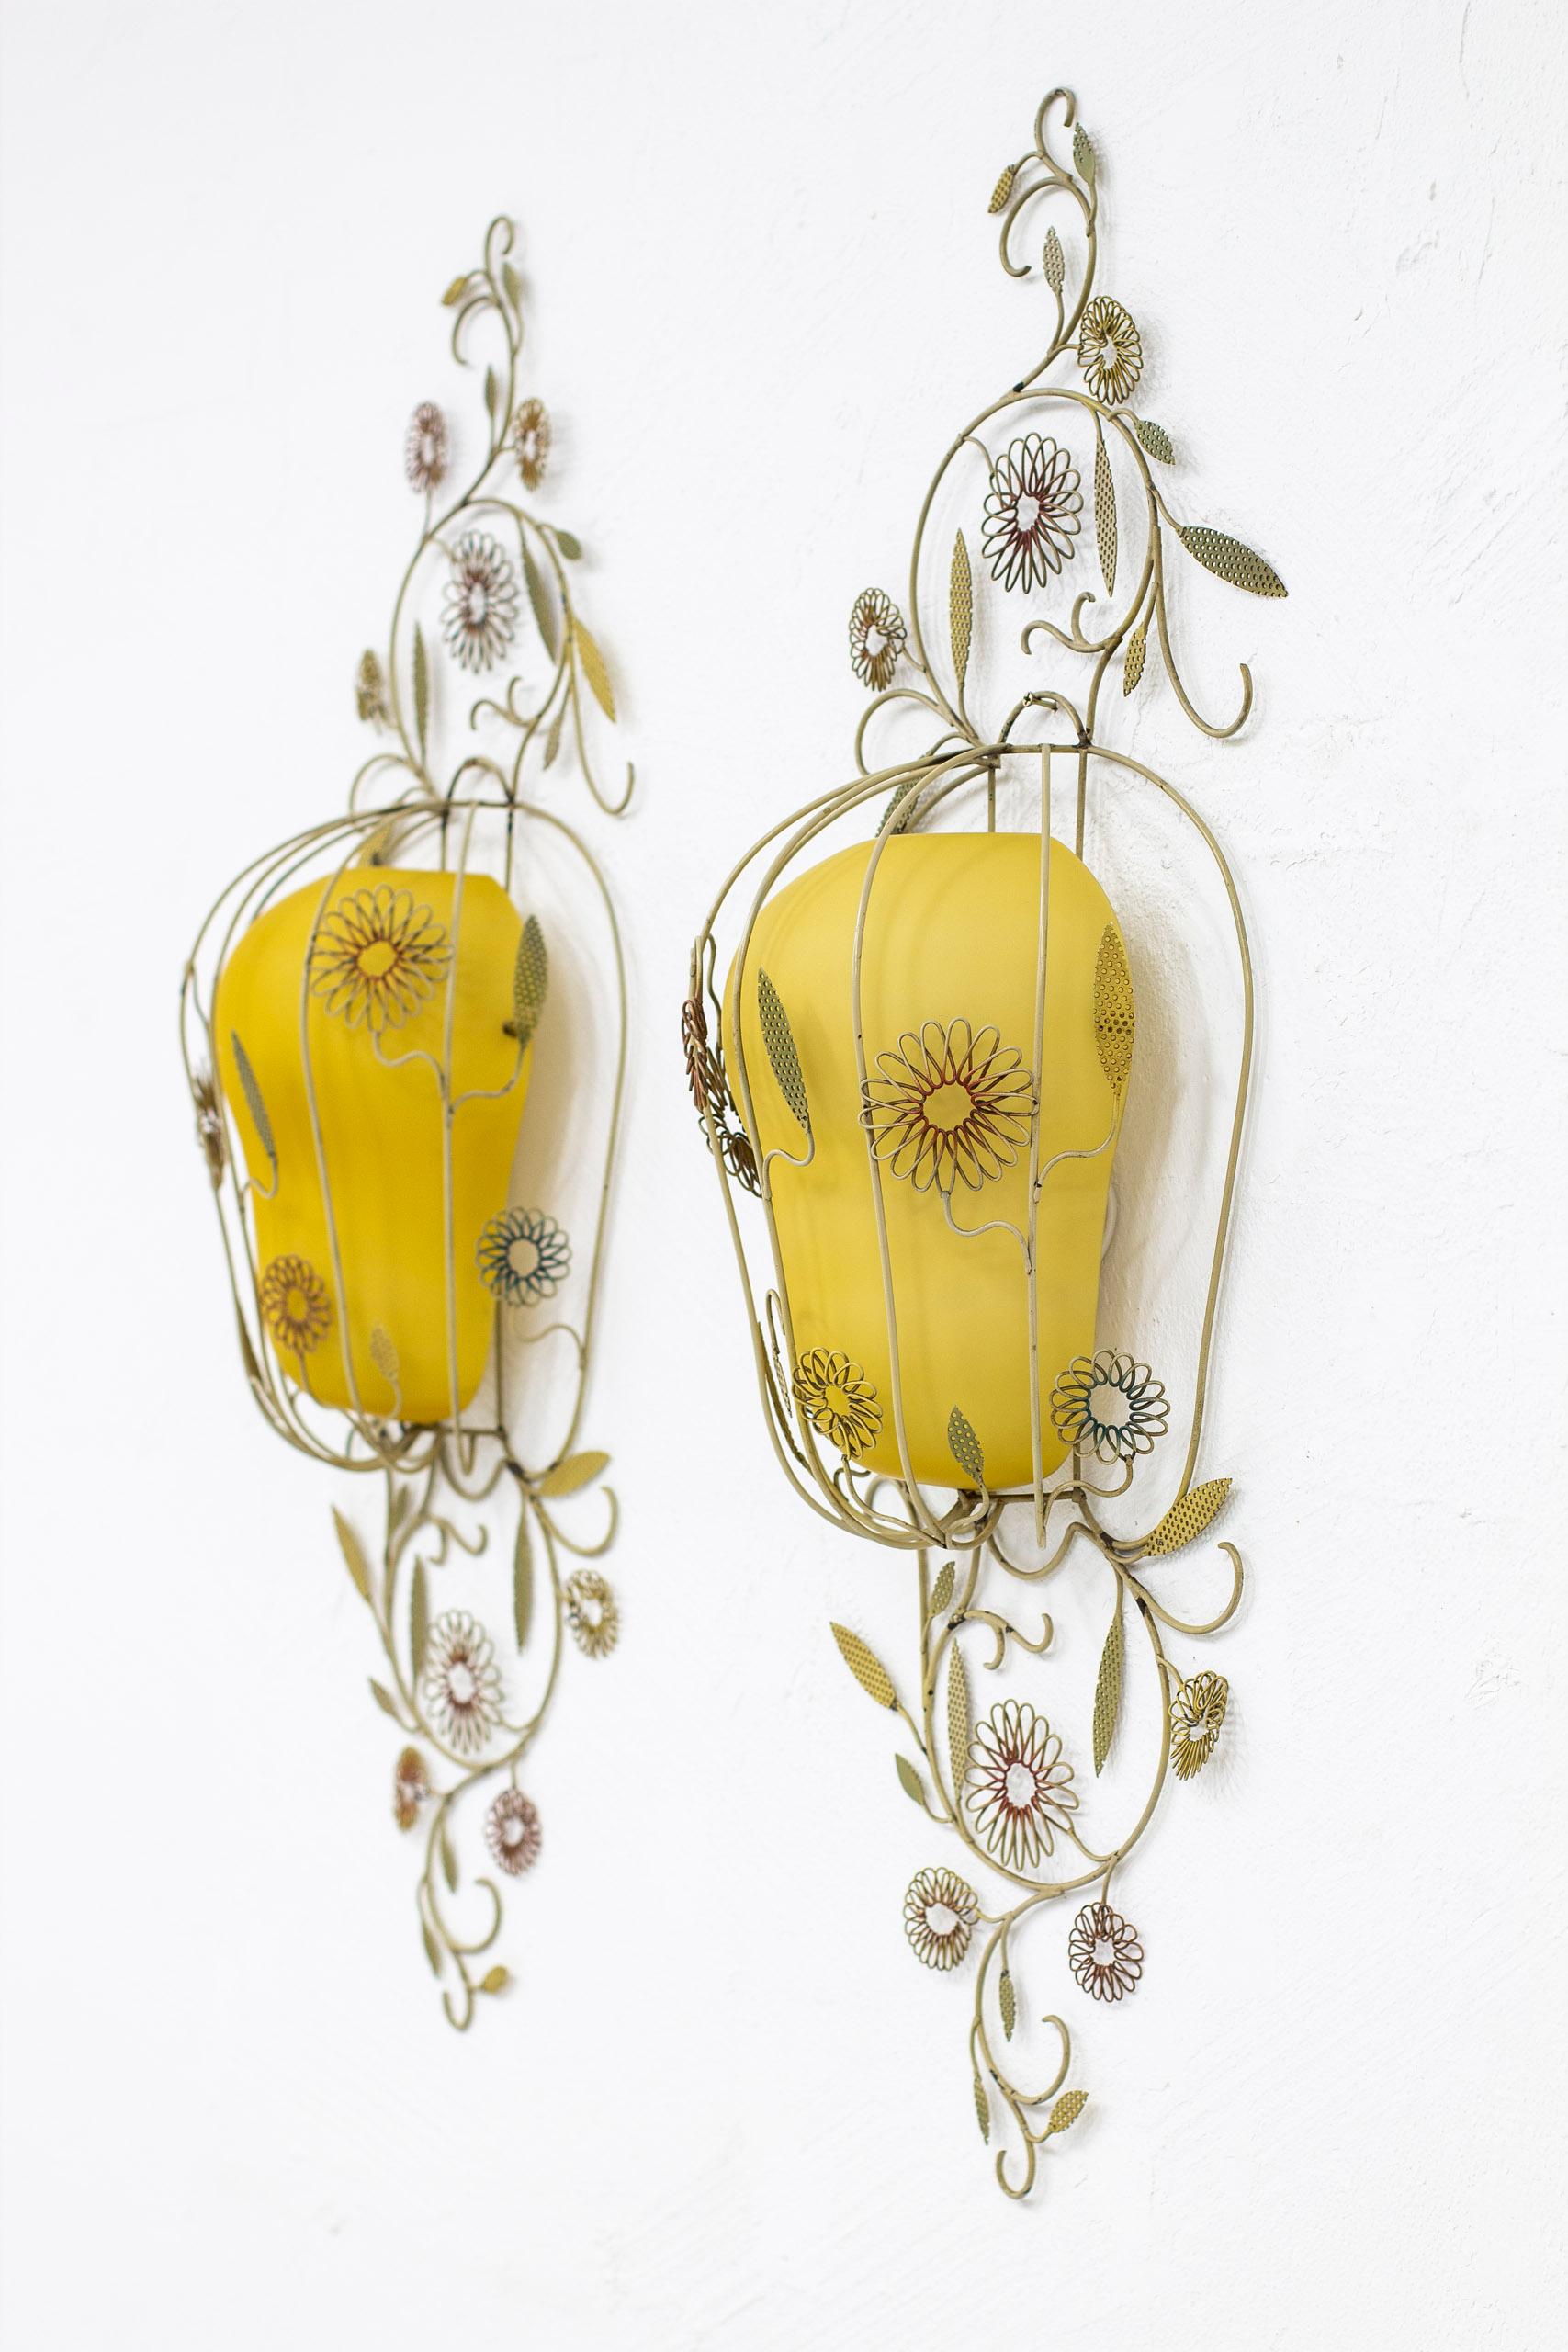 Rare wall lamps produced in Stockholm, Sweden by Corona Belysning. Made sometime between the 1940-1950s. Polychromed lacquered metal frame with stylized leaves and flowers. Opal glass shades in white and yellow glass. Very good vintage condition